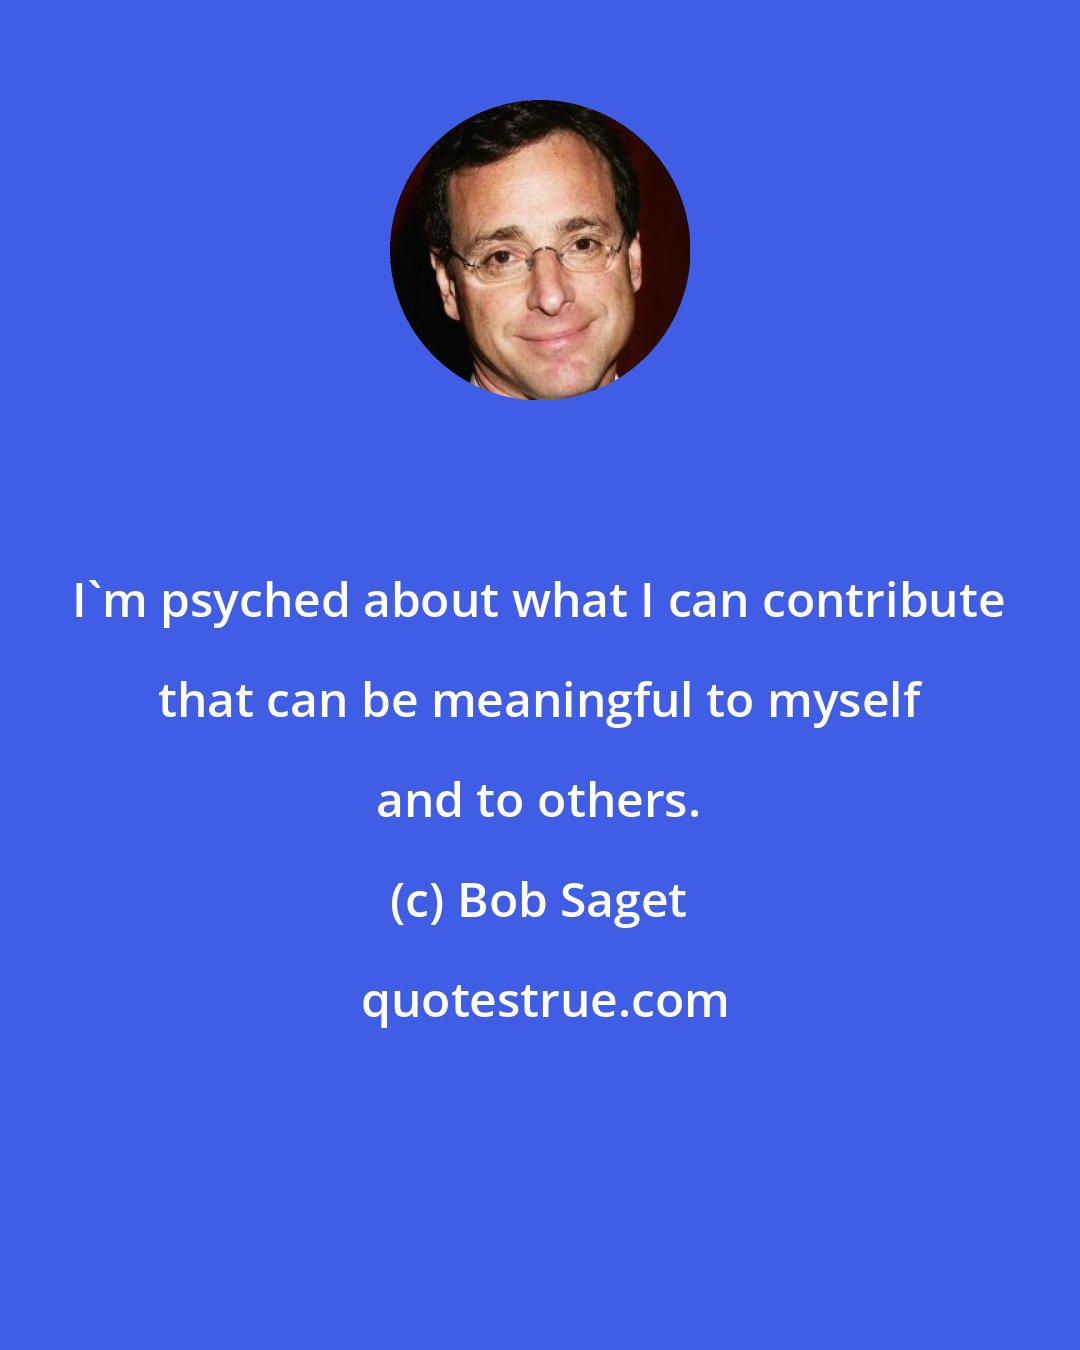 Bob Saget: I'm psyched about what I can contribute that can be meaningful to myself and to others.